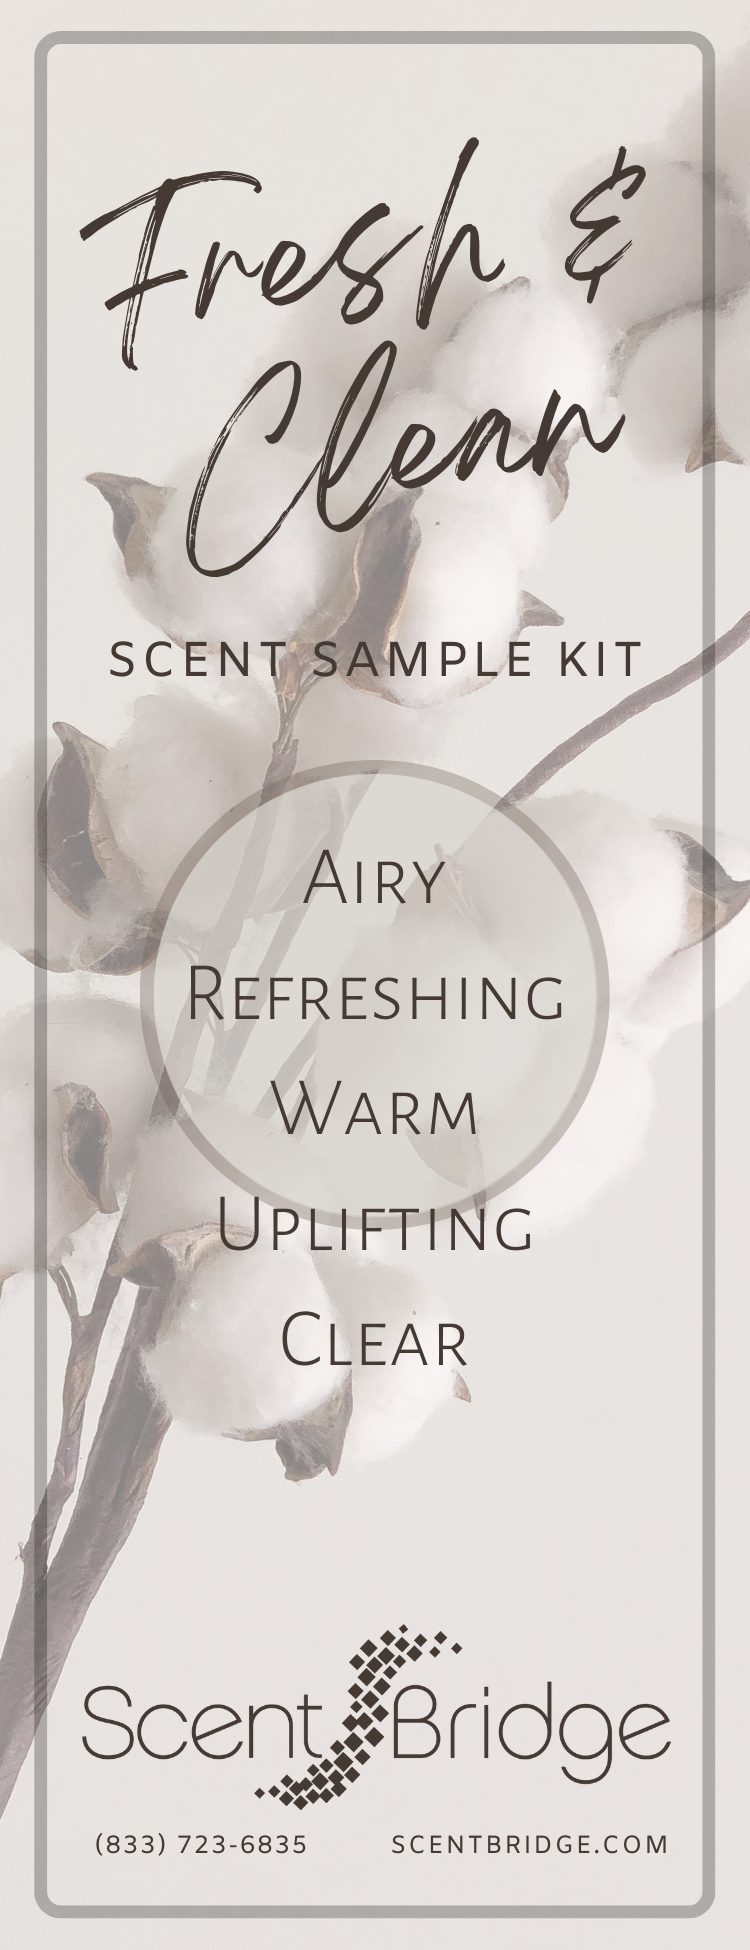 Fresh & Clean Sample Collection Pack plus $10 credit